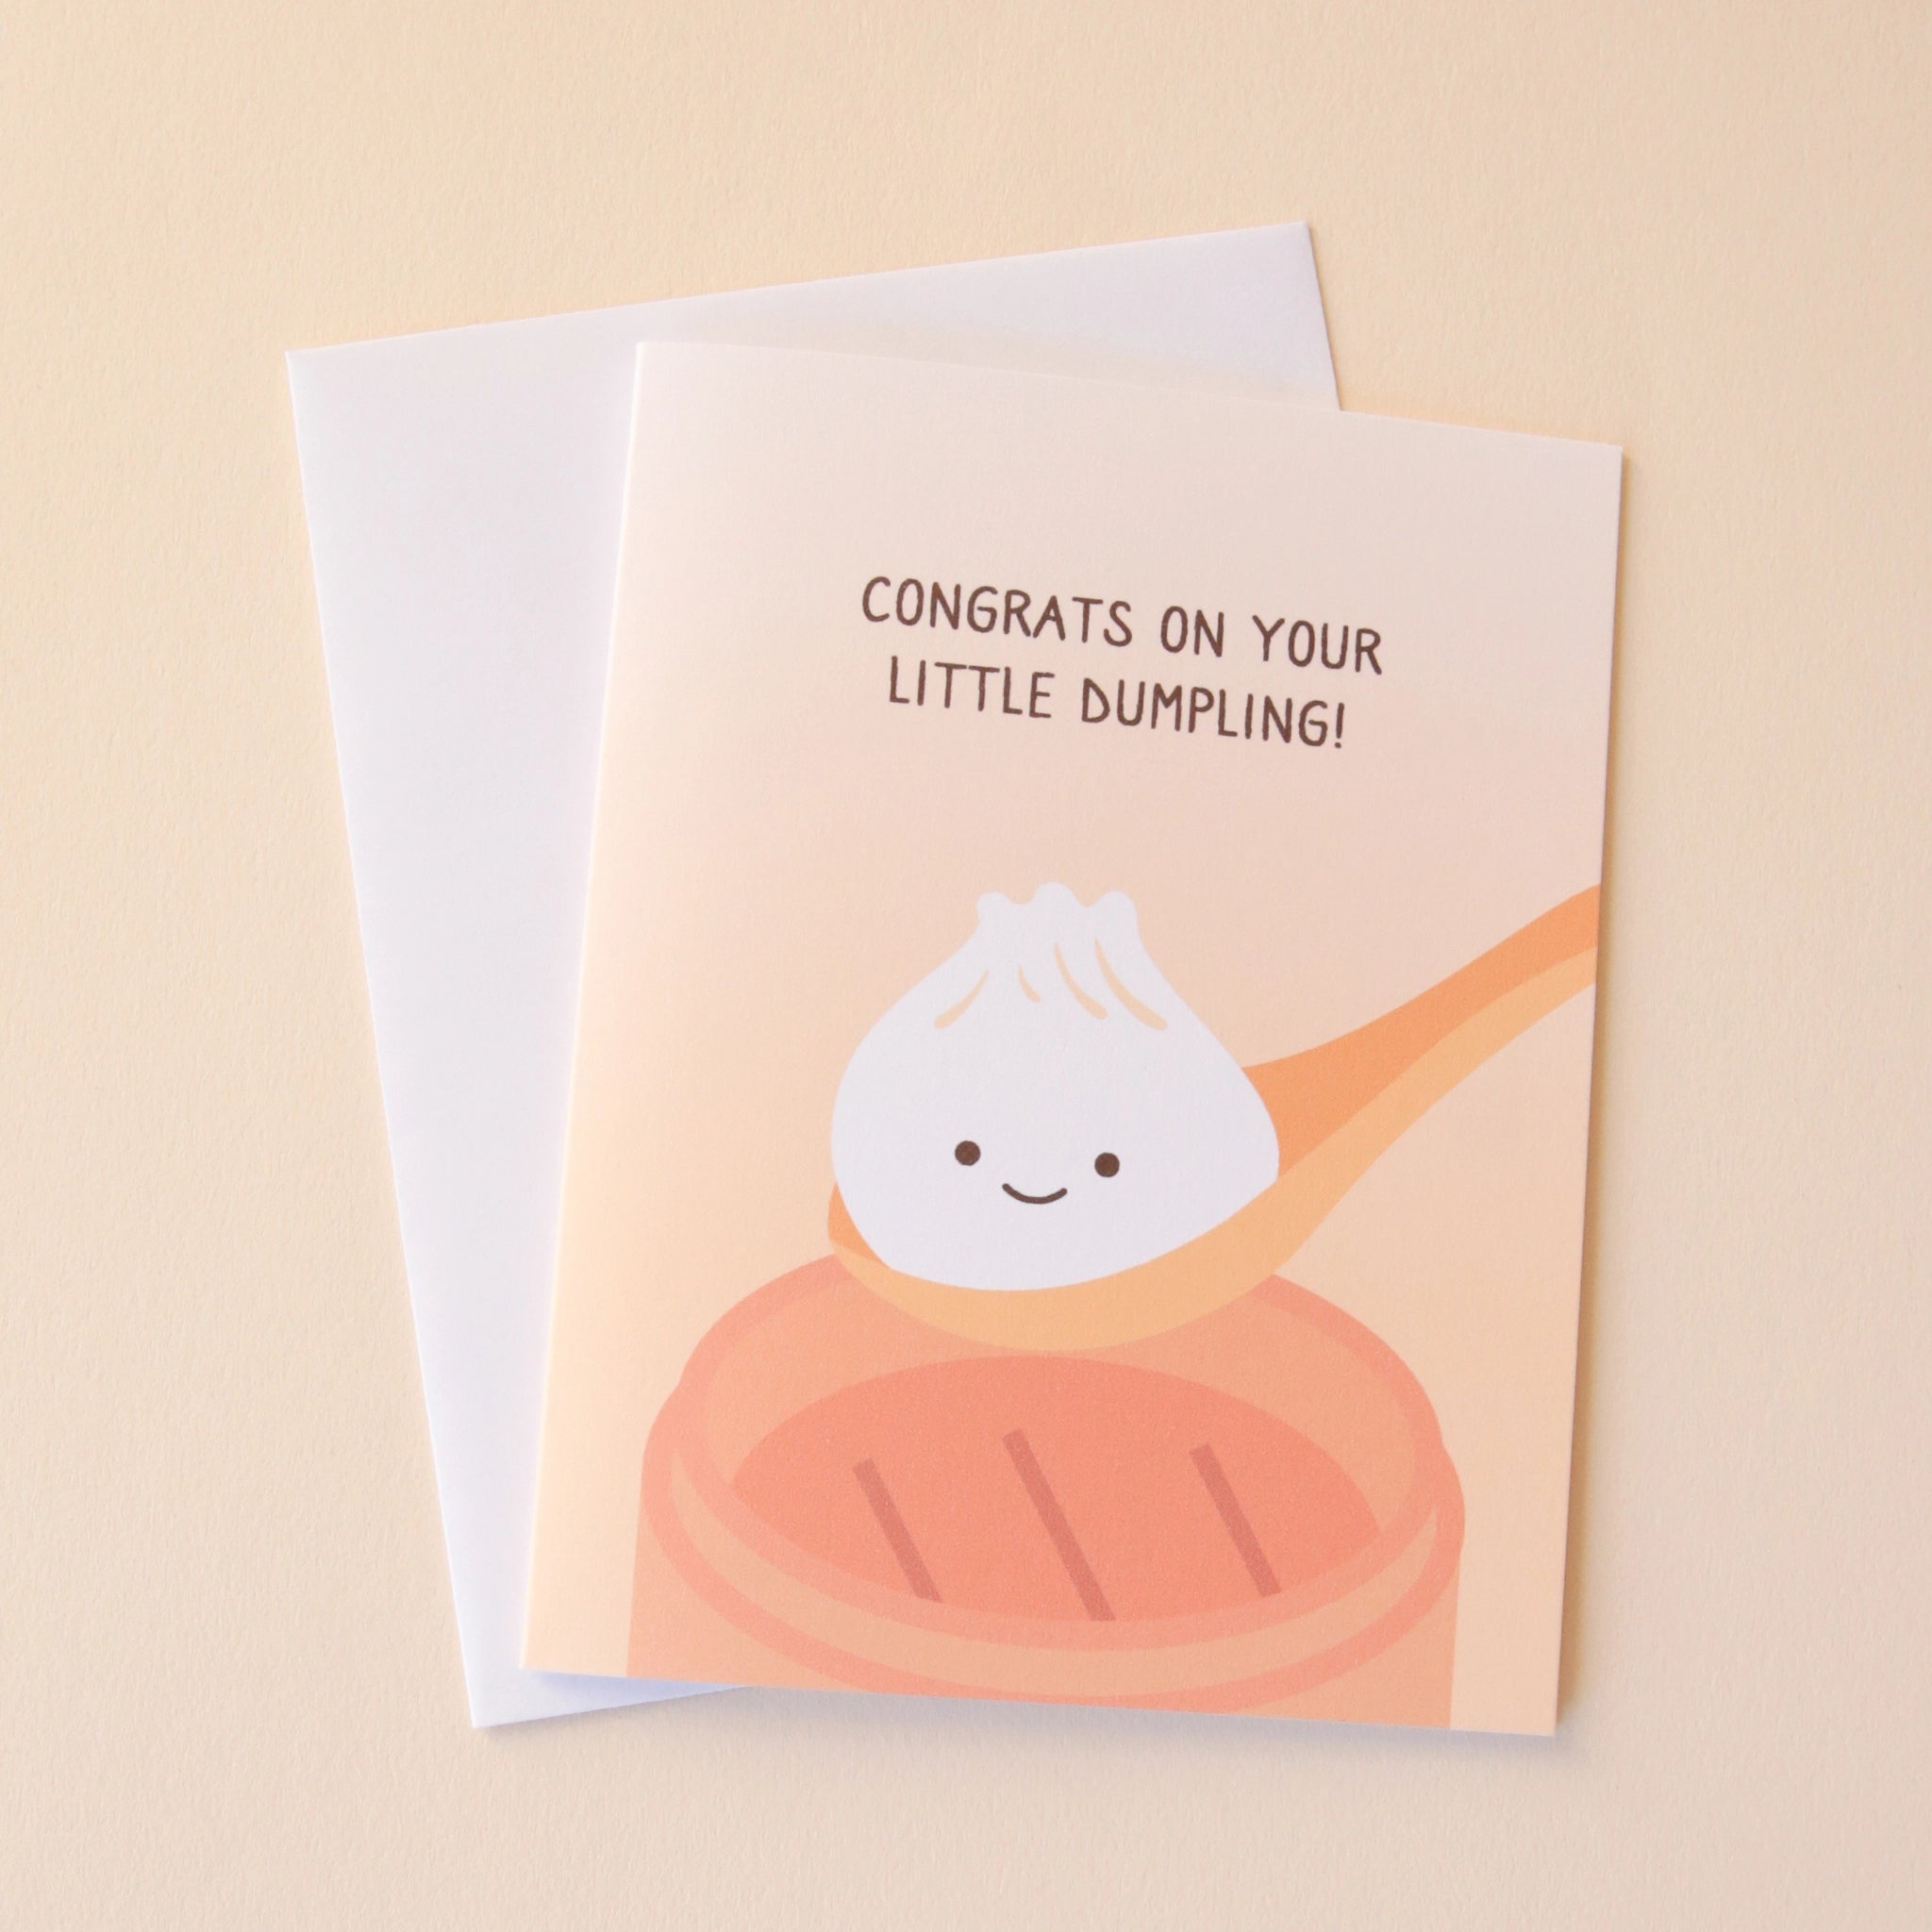 A light orange card with a illustration of a dumpling in a spoon with a smiling face along with text above it that reads, &quot;Congrats On Your Little Dumpling!&quot; in dark brown letters along with a white envelope.